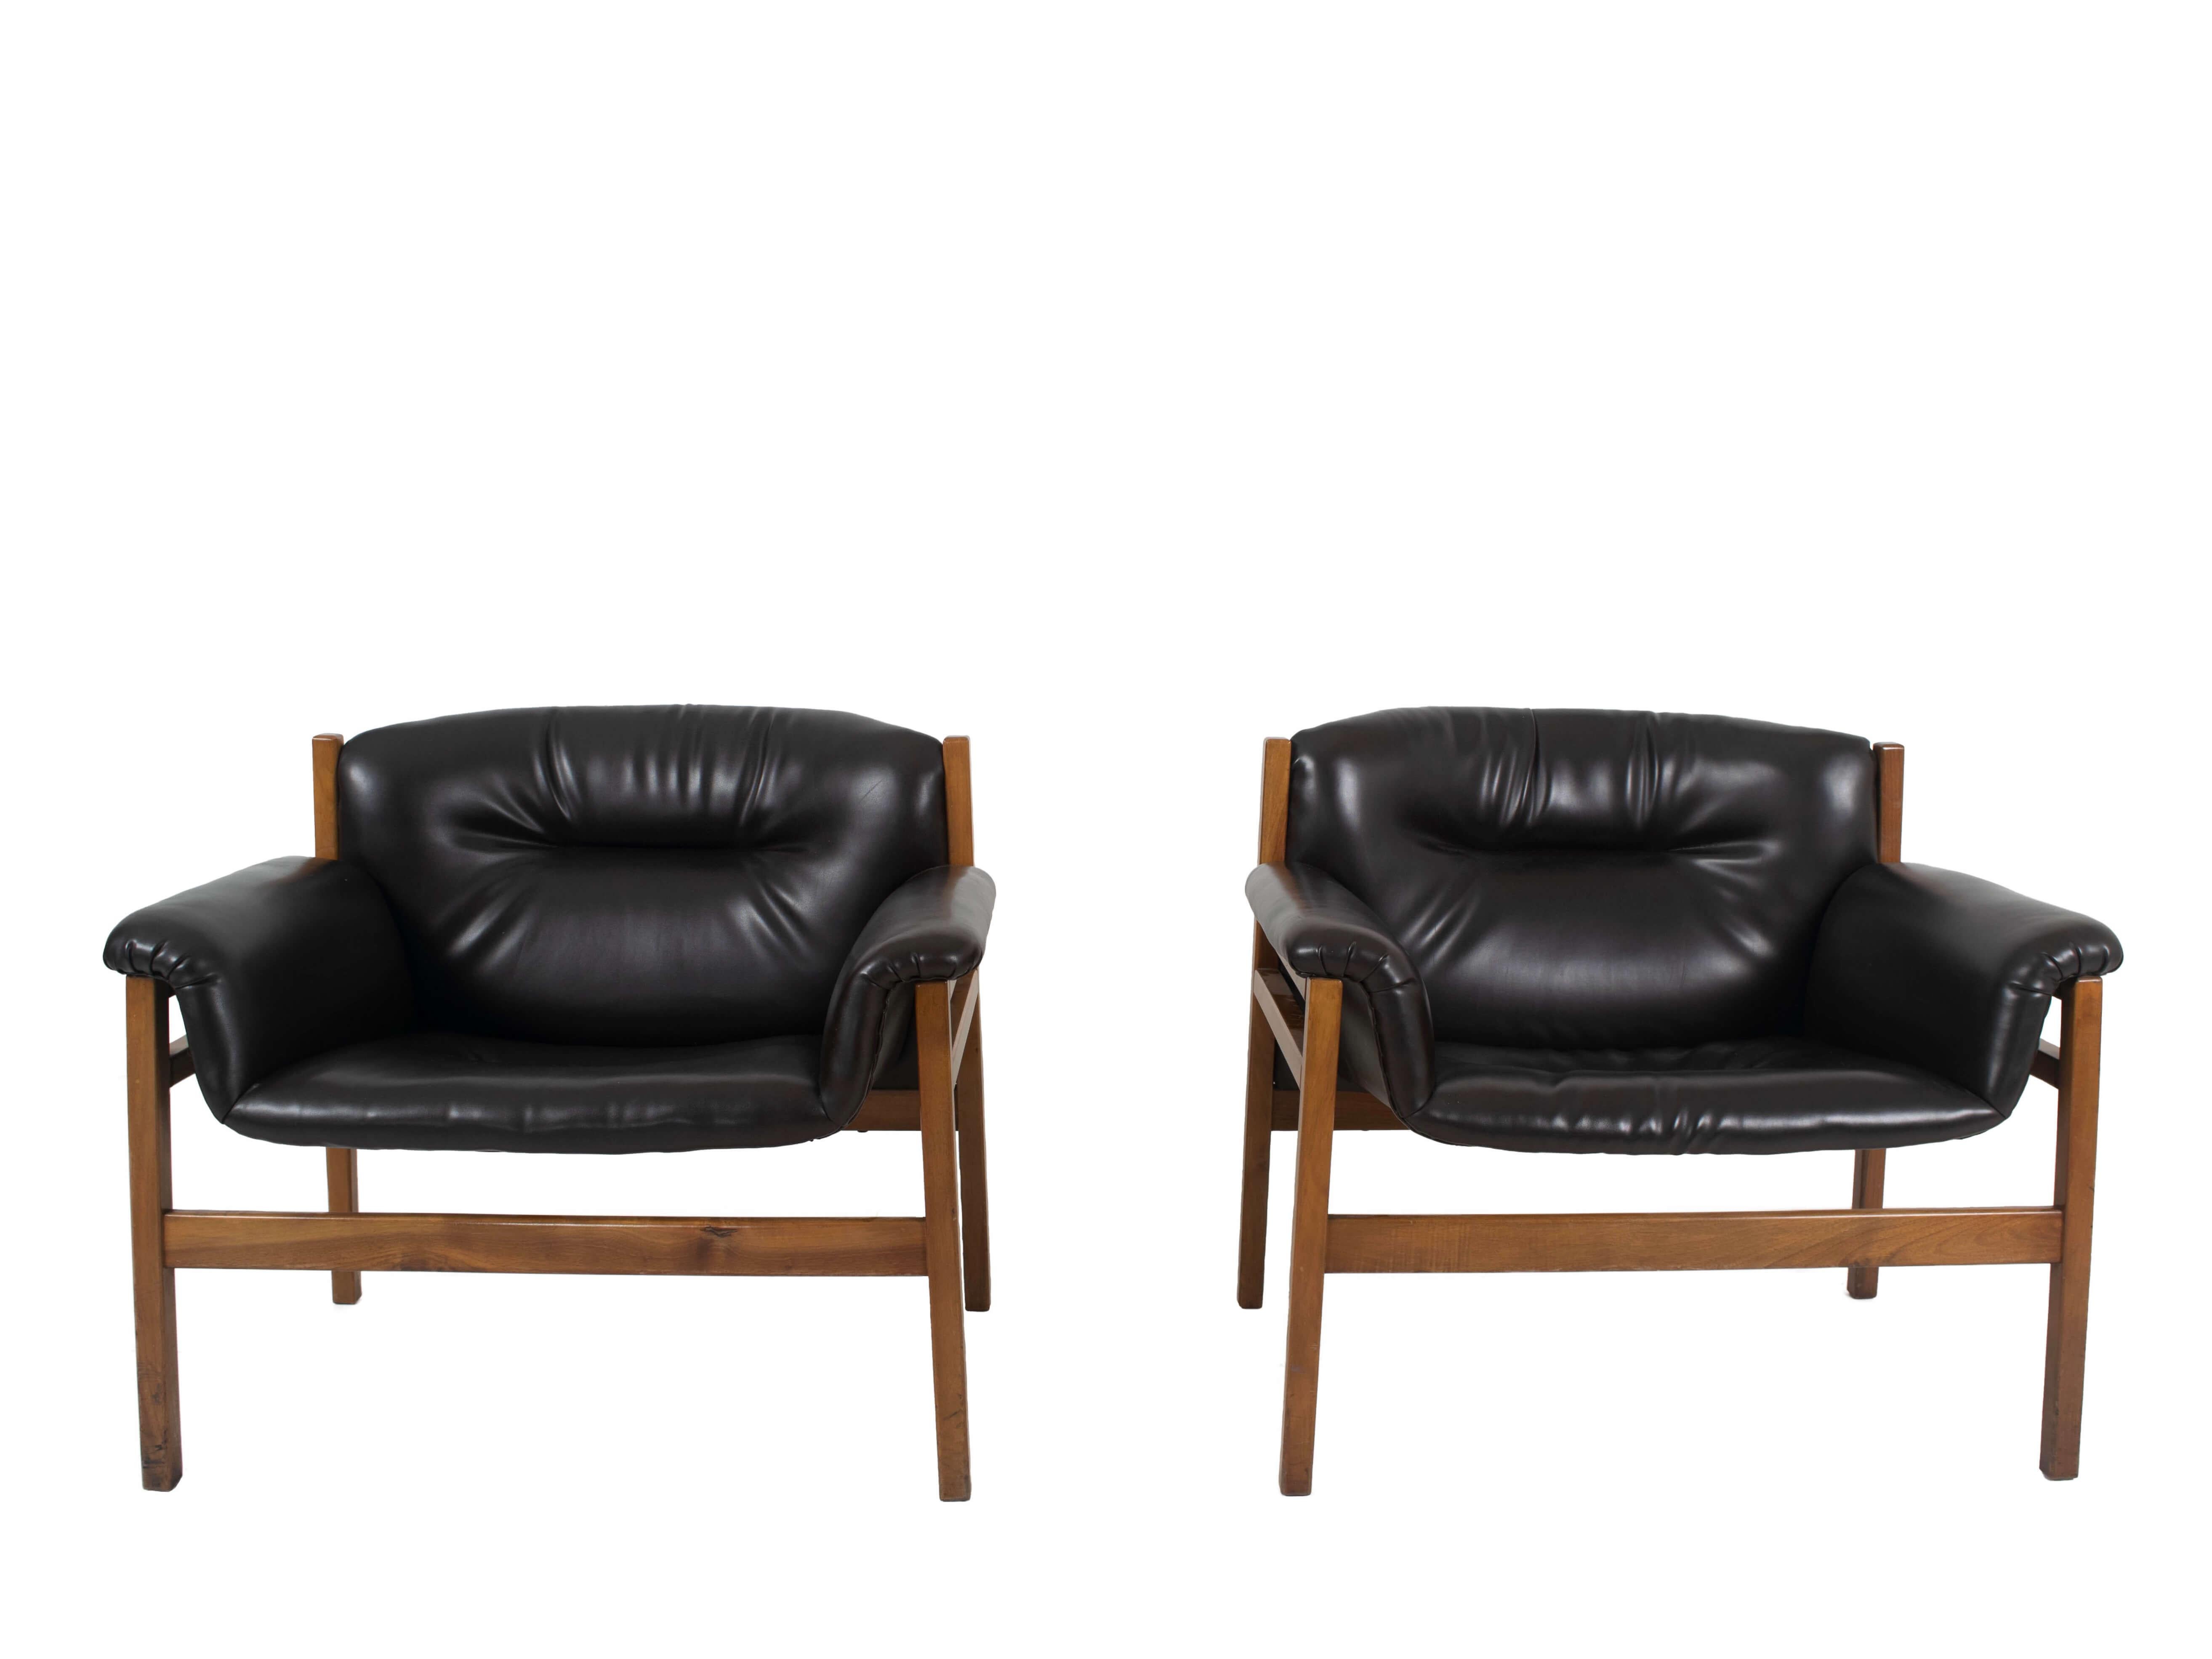 Set of two Italian vintage armchairs in the style of Tito Agnoli, 1960s. These two armchairs in wood and black skai leather are very comfortable. The design is linear and minimalistic, however the use of the round shapes in the cushions gives it a